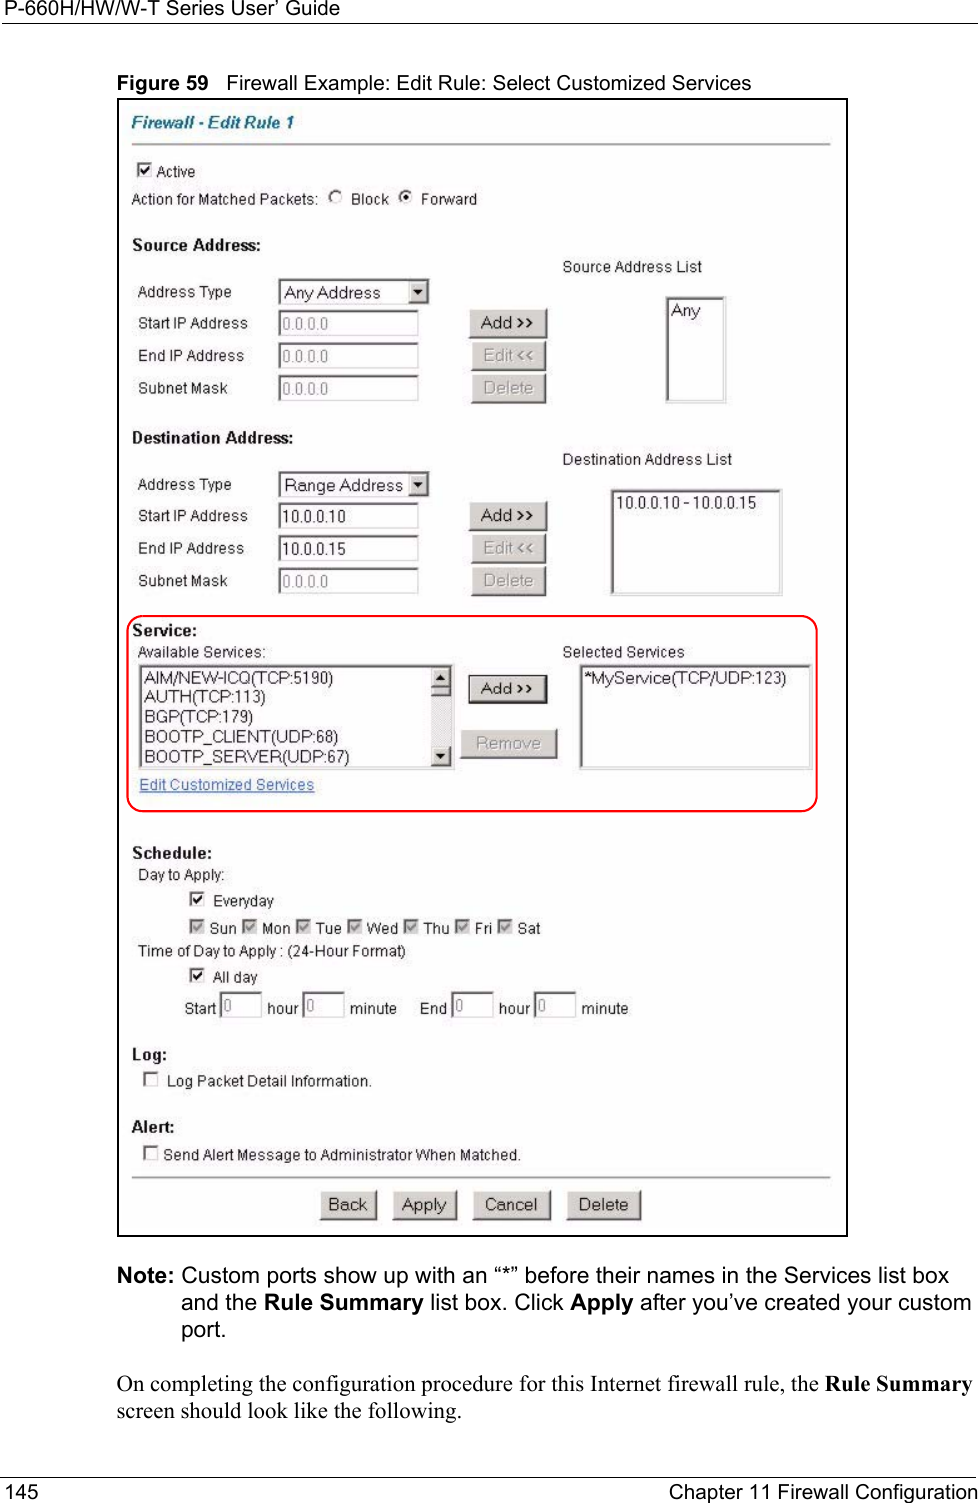 P-660H/HW/W-T Series User’ Guide145 Chapter 11 Firewall ConfigurationFigure 59   Firewall Example: Edit Rule: Select Customized ServicesNote: Custom ports show up with an “*” before their names in the Services list box and the Rule Summary list box. Click Apply after you’ve created your custom port.On completing the configuration procedure for this Internet firewall rule, the Rule Summary screen should look like the following.